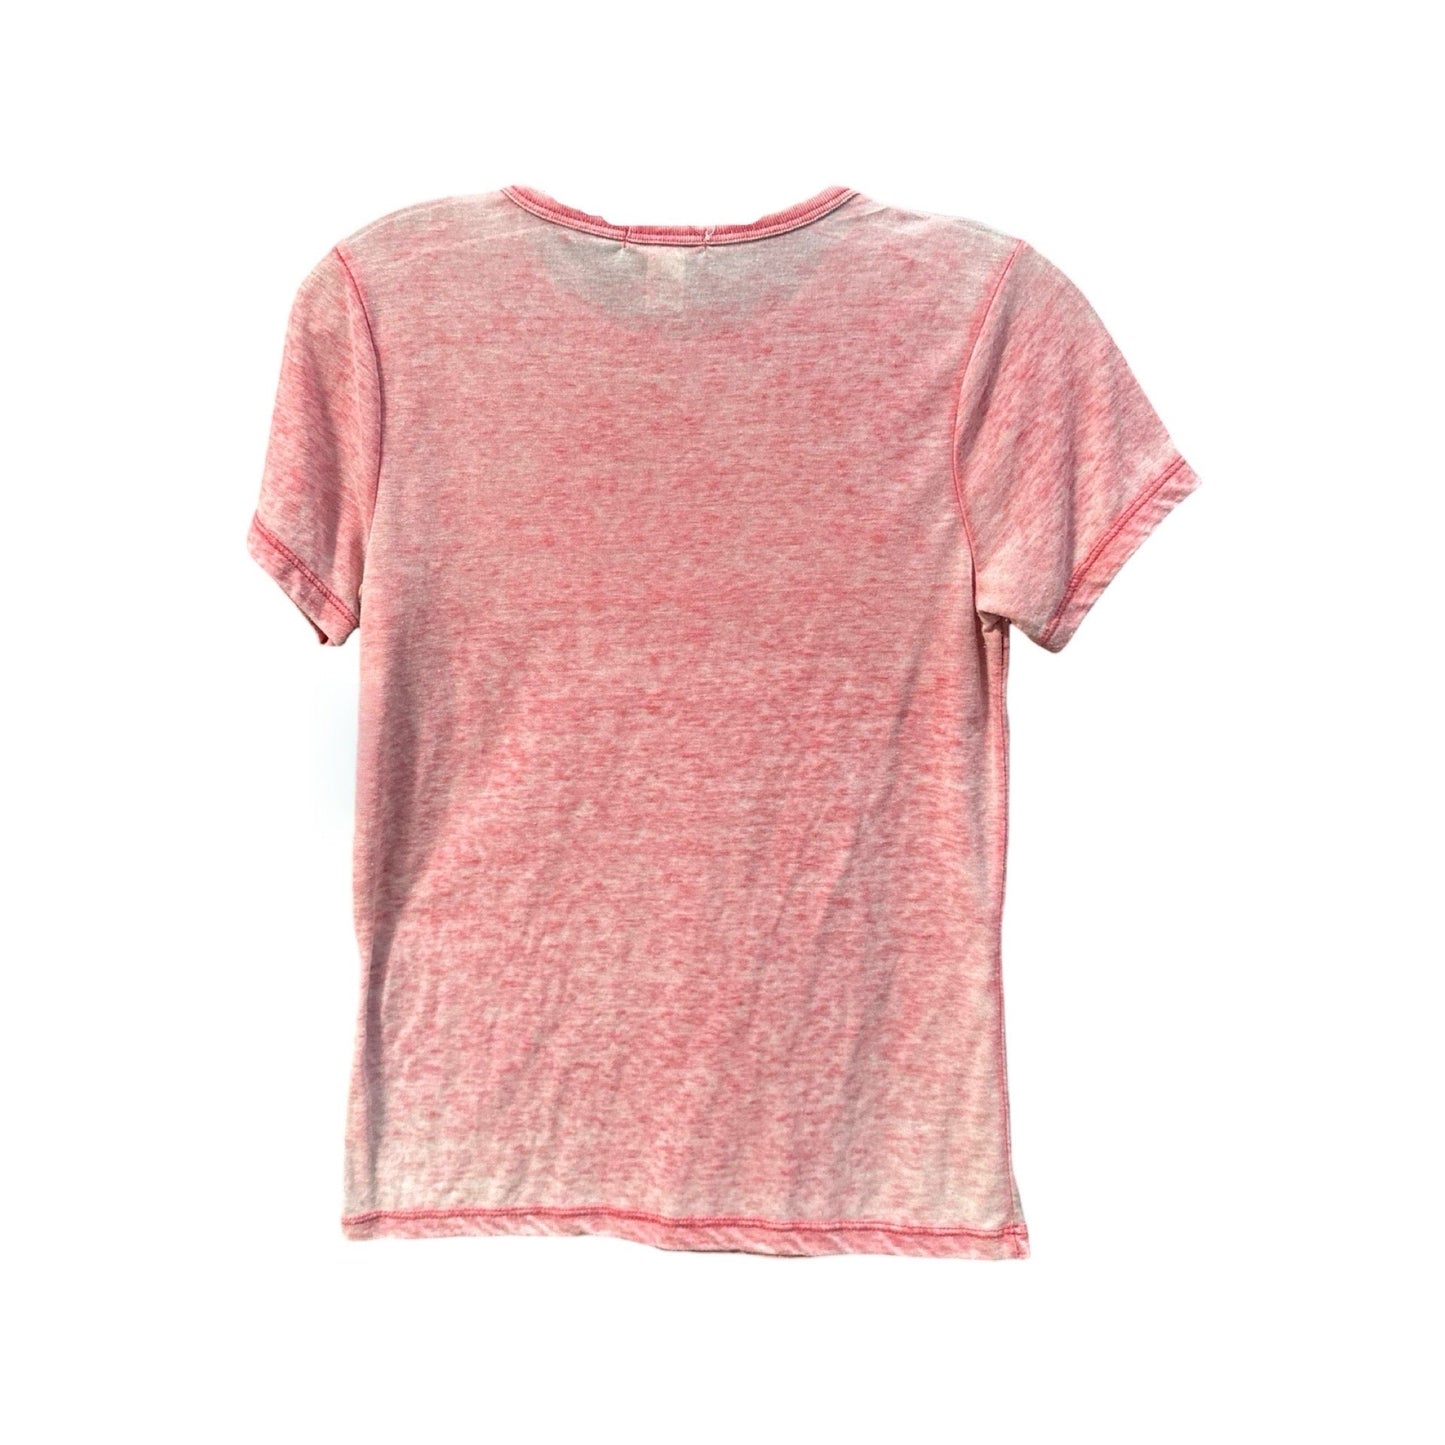 Pink Top Short Sleeve Forever 21, Size S